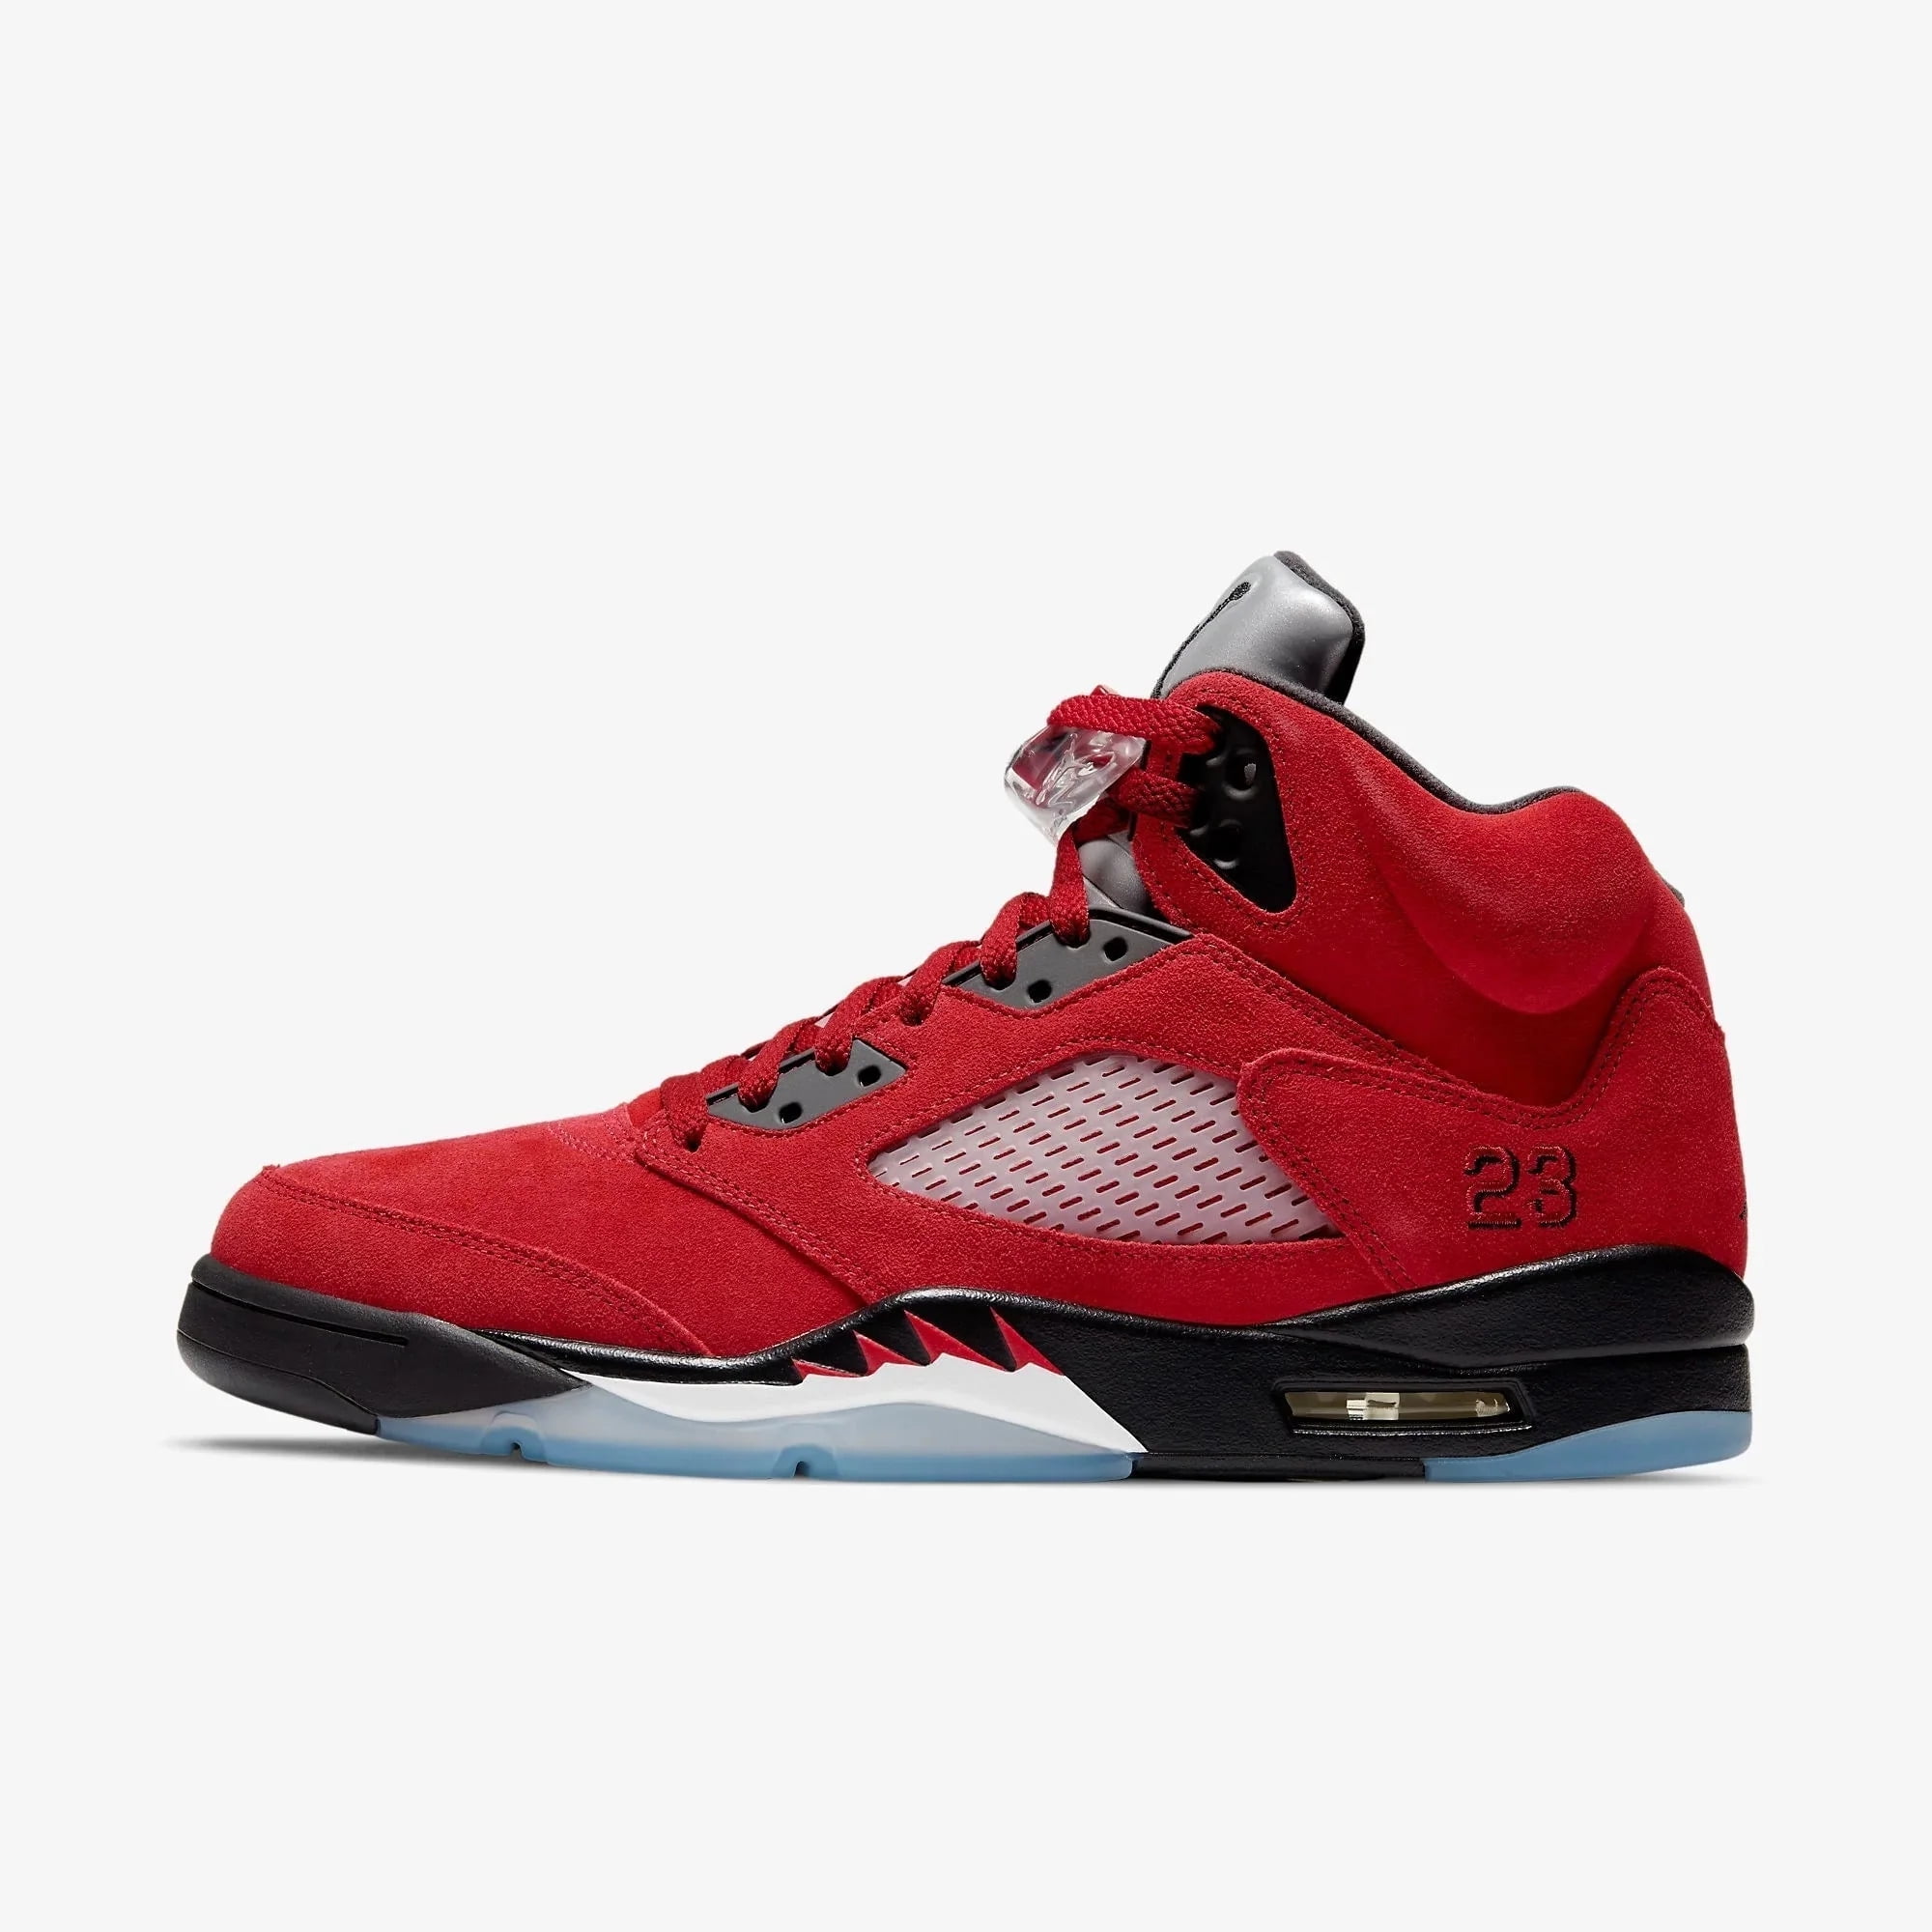 Nike Jordan 5 Retro Size 10 Raging Bull Red DD0587-600 Varsity  Red/Black-White - clothing & accessories - by owner 